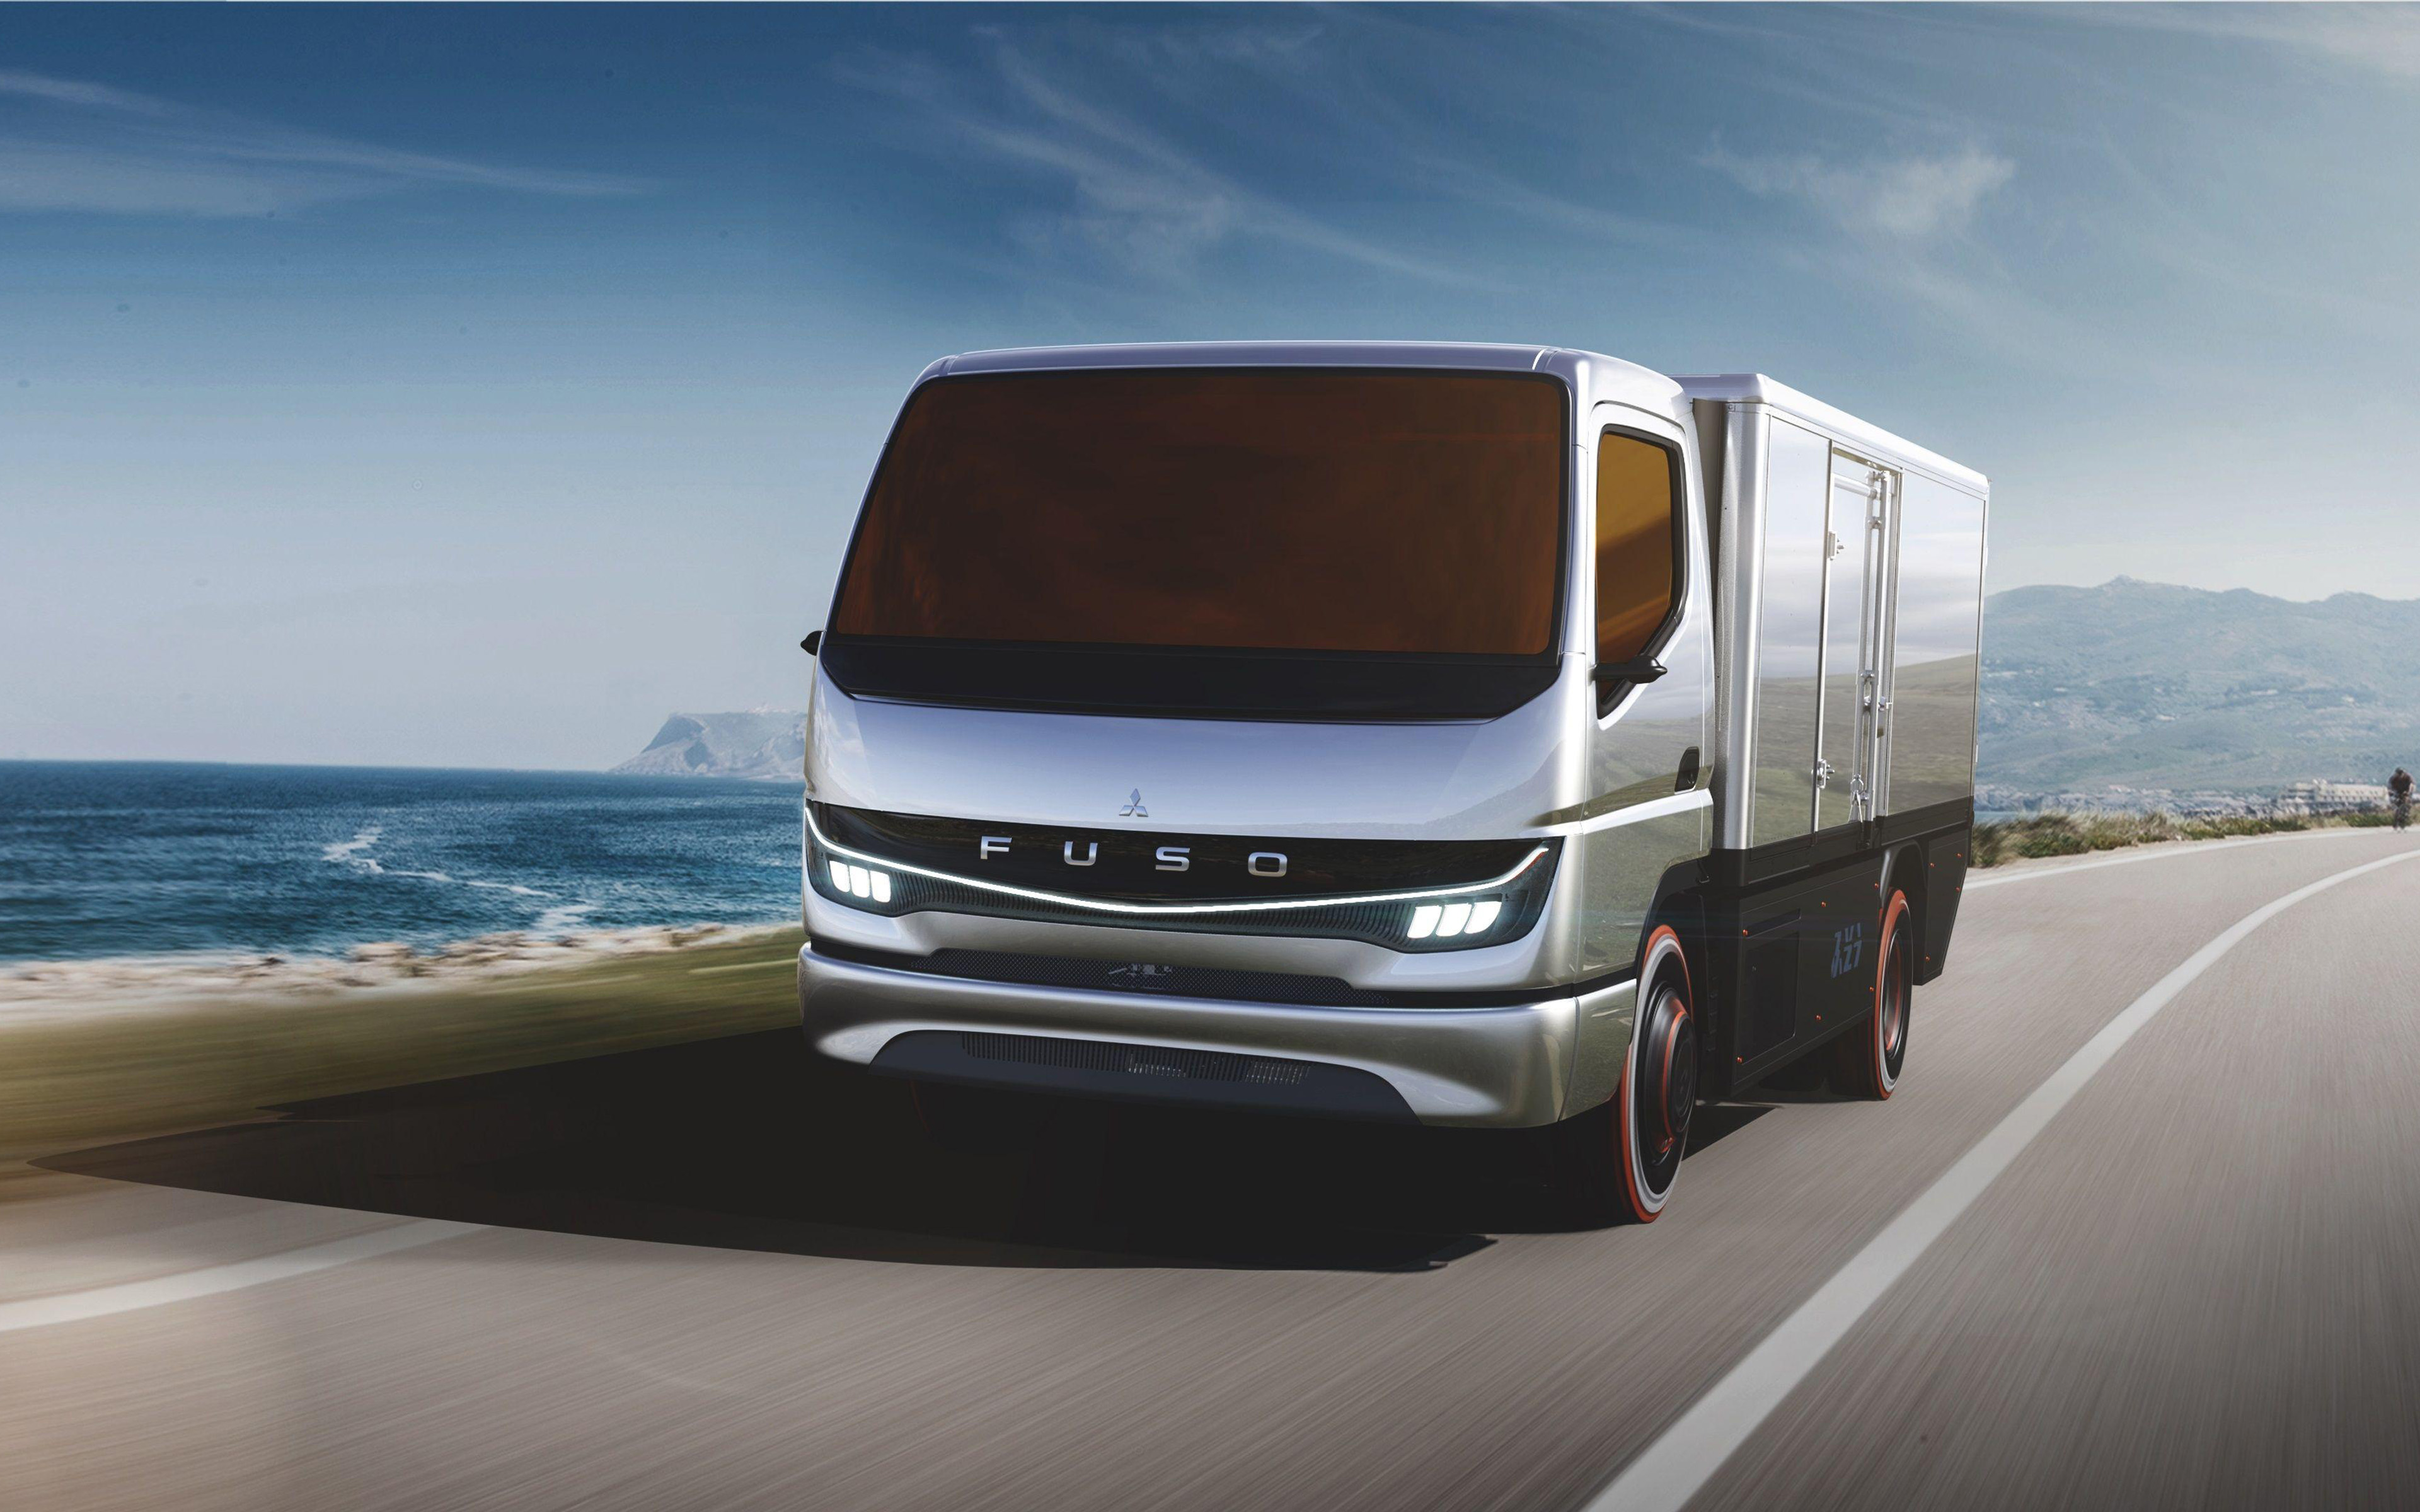 Download Wallpaper Mitsubishi Fuso Vision F Cell, 4k, LKW, 2019 Trucks, Electric Trucks, Cargo Transport, 2019 Mitsubishi Fuso, Mitsubishi For Desktop With Resolution 3840x2400. High Quality HD Picture Wallpaper